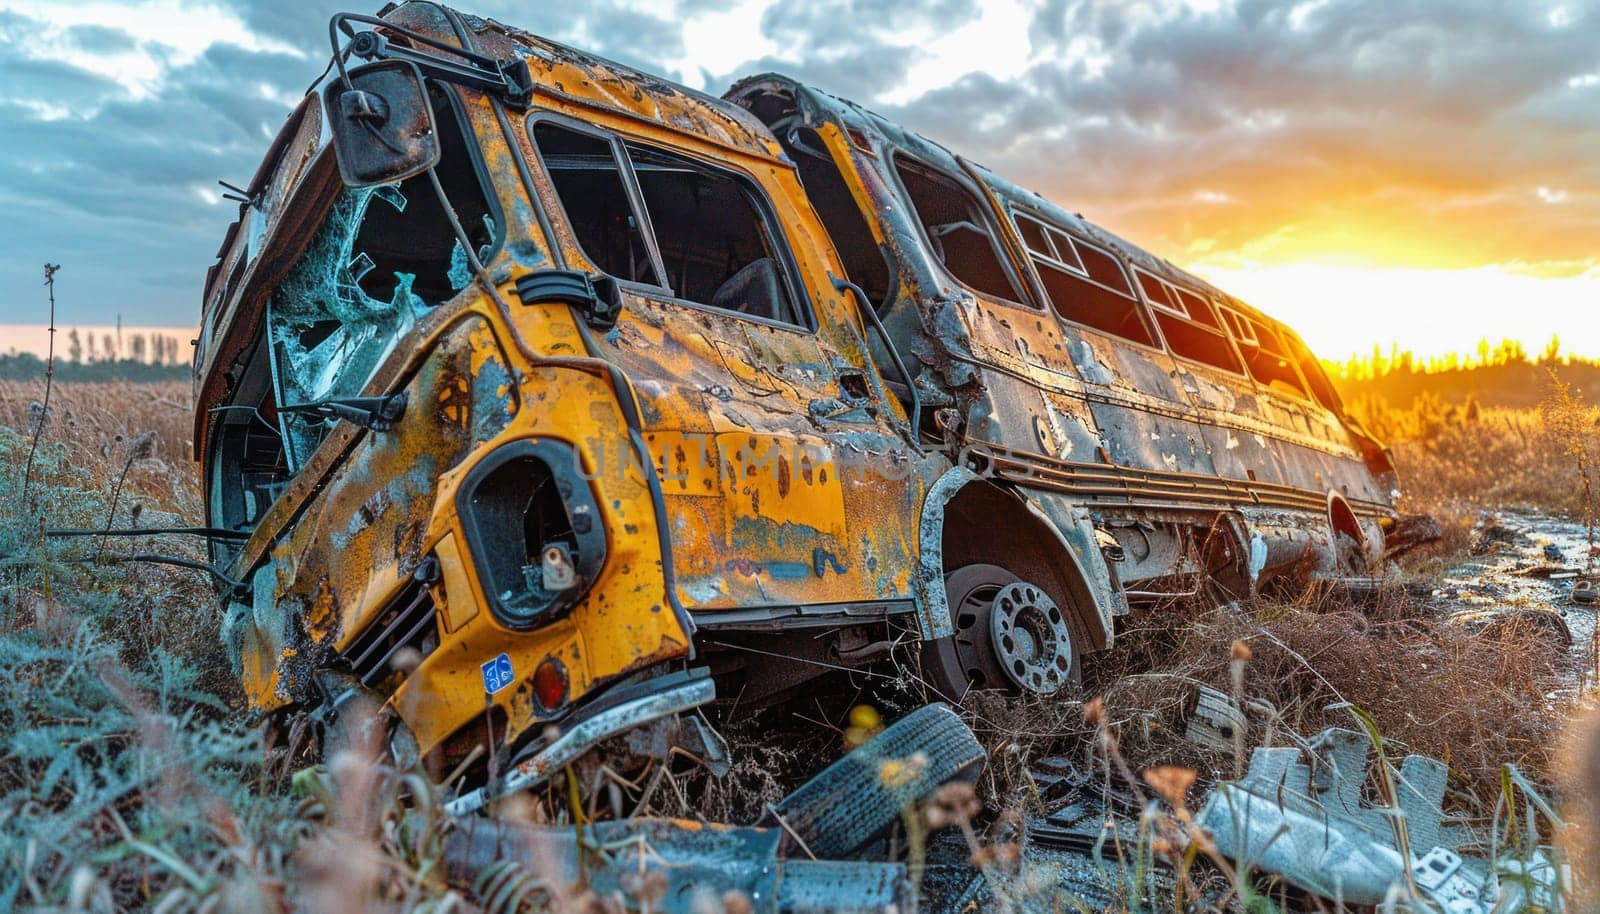 Damaged school bus parked in a field at sunset, under a cloudy sky. Automotive scene in a natural setting